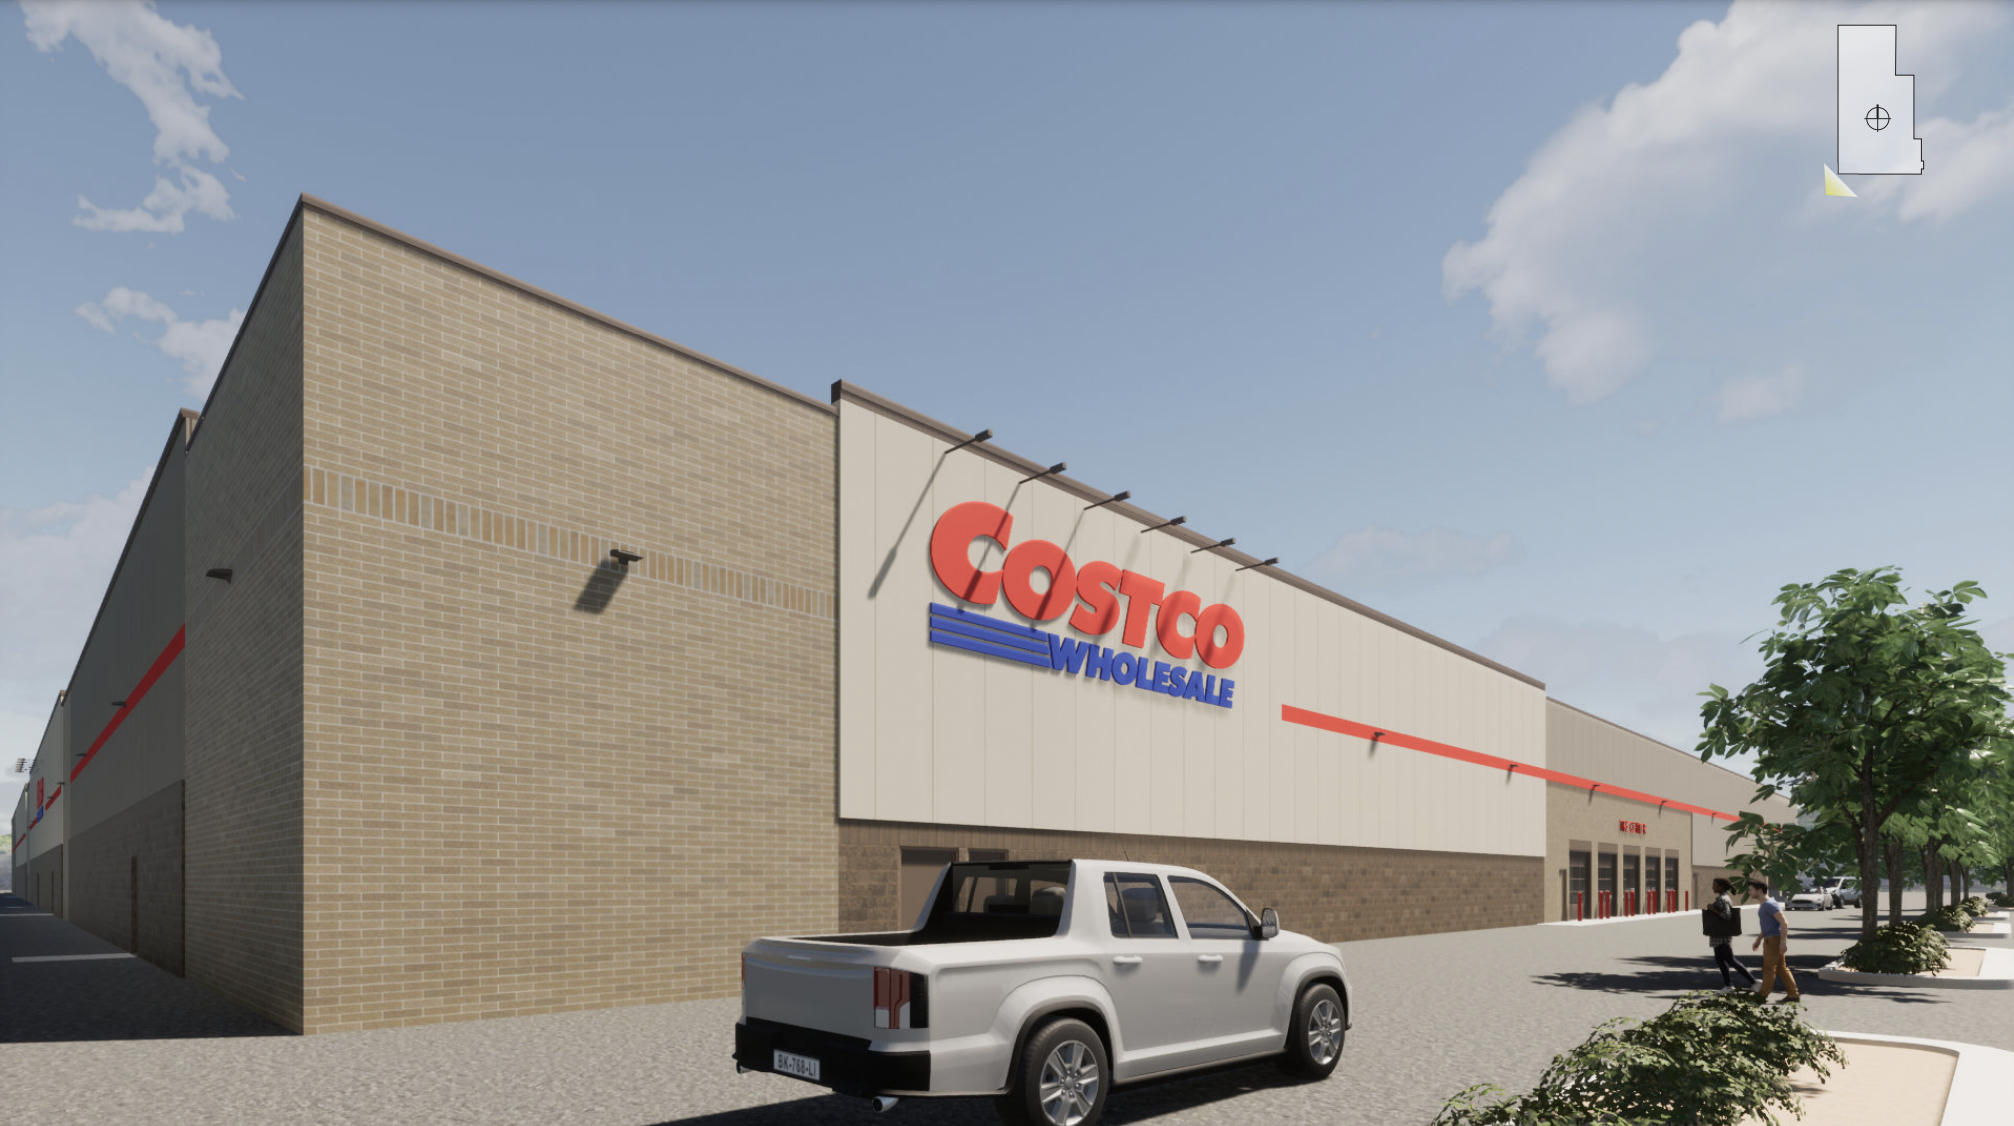 Rendering of a Costco tire center